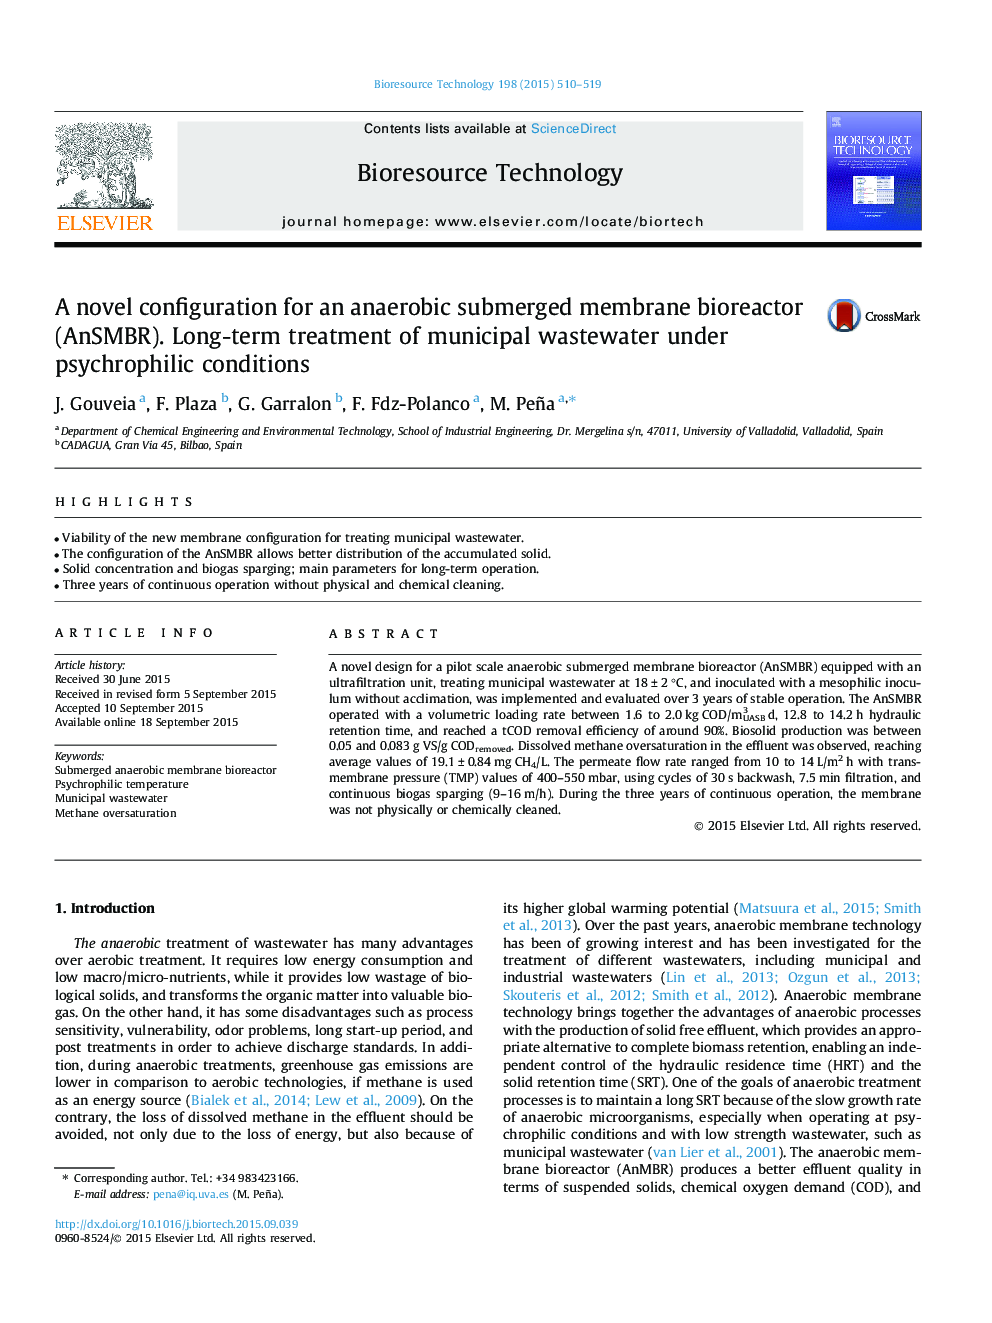 A novel configuration for an anaerobic submerged membrane bioreactor (AnSMBR). Long-term treatment of municipal wastewater under psychrophilic conditions